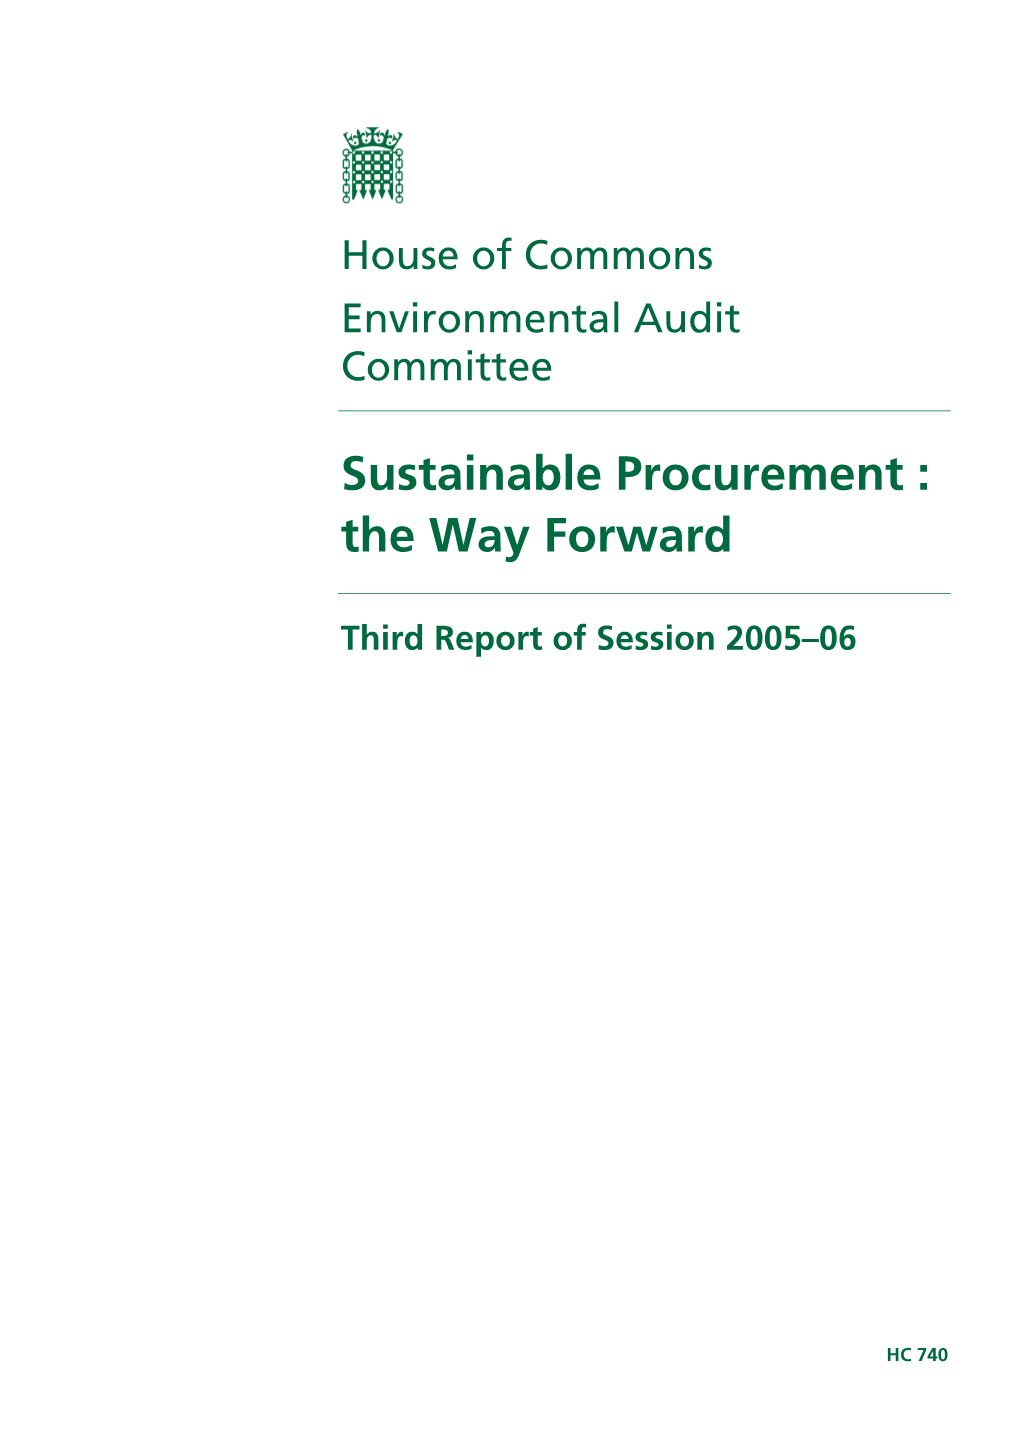 Sustainable Procurement : the Way Forward